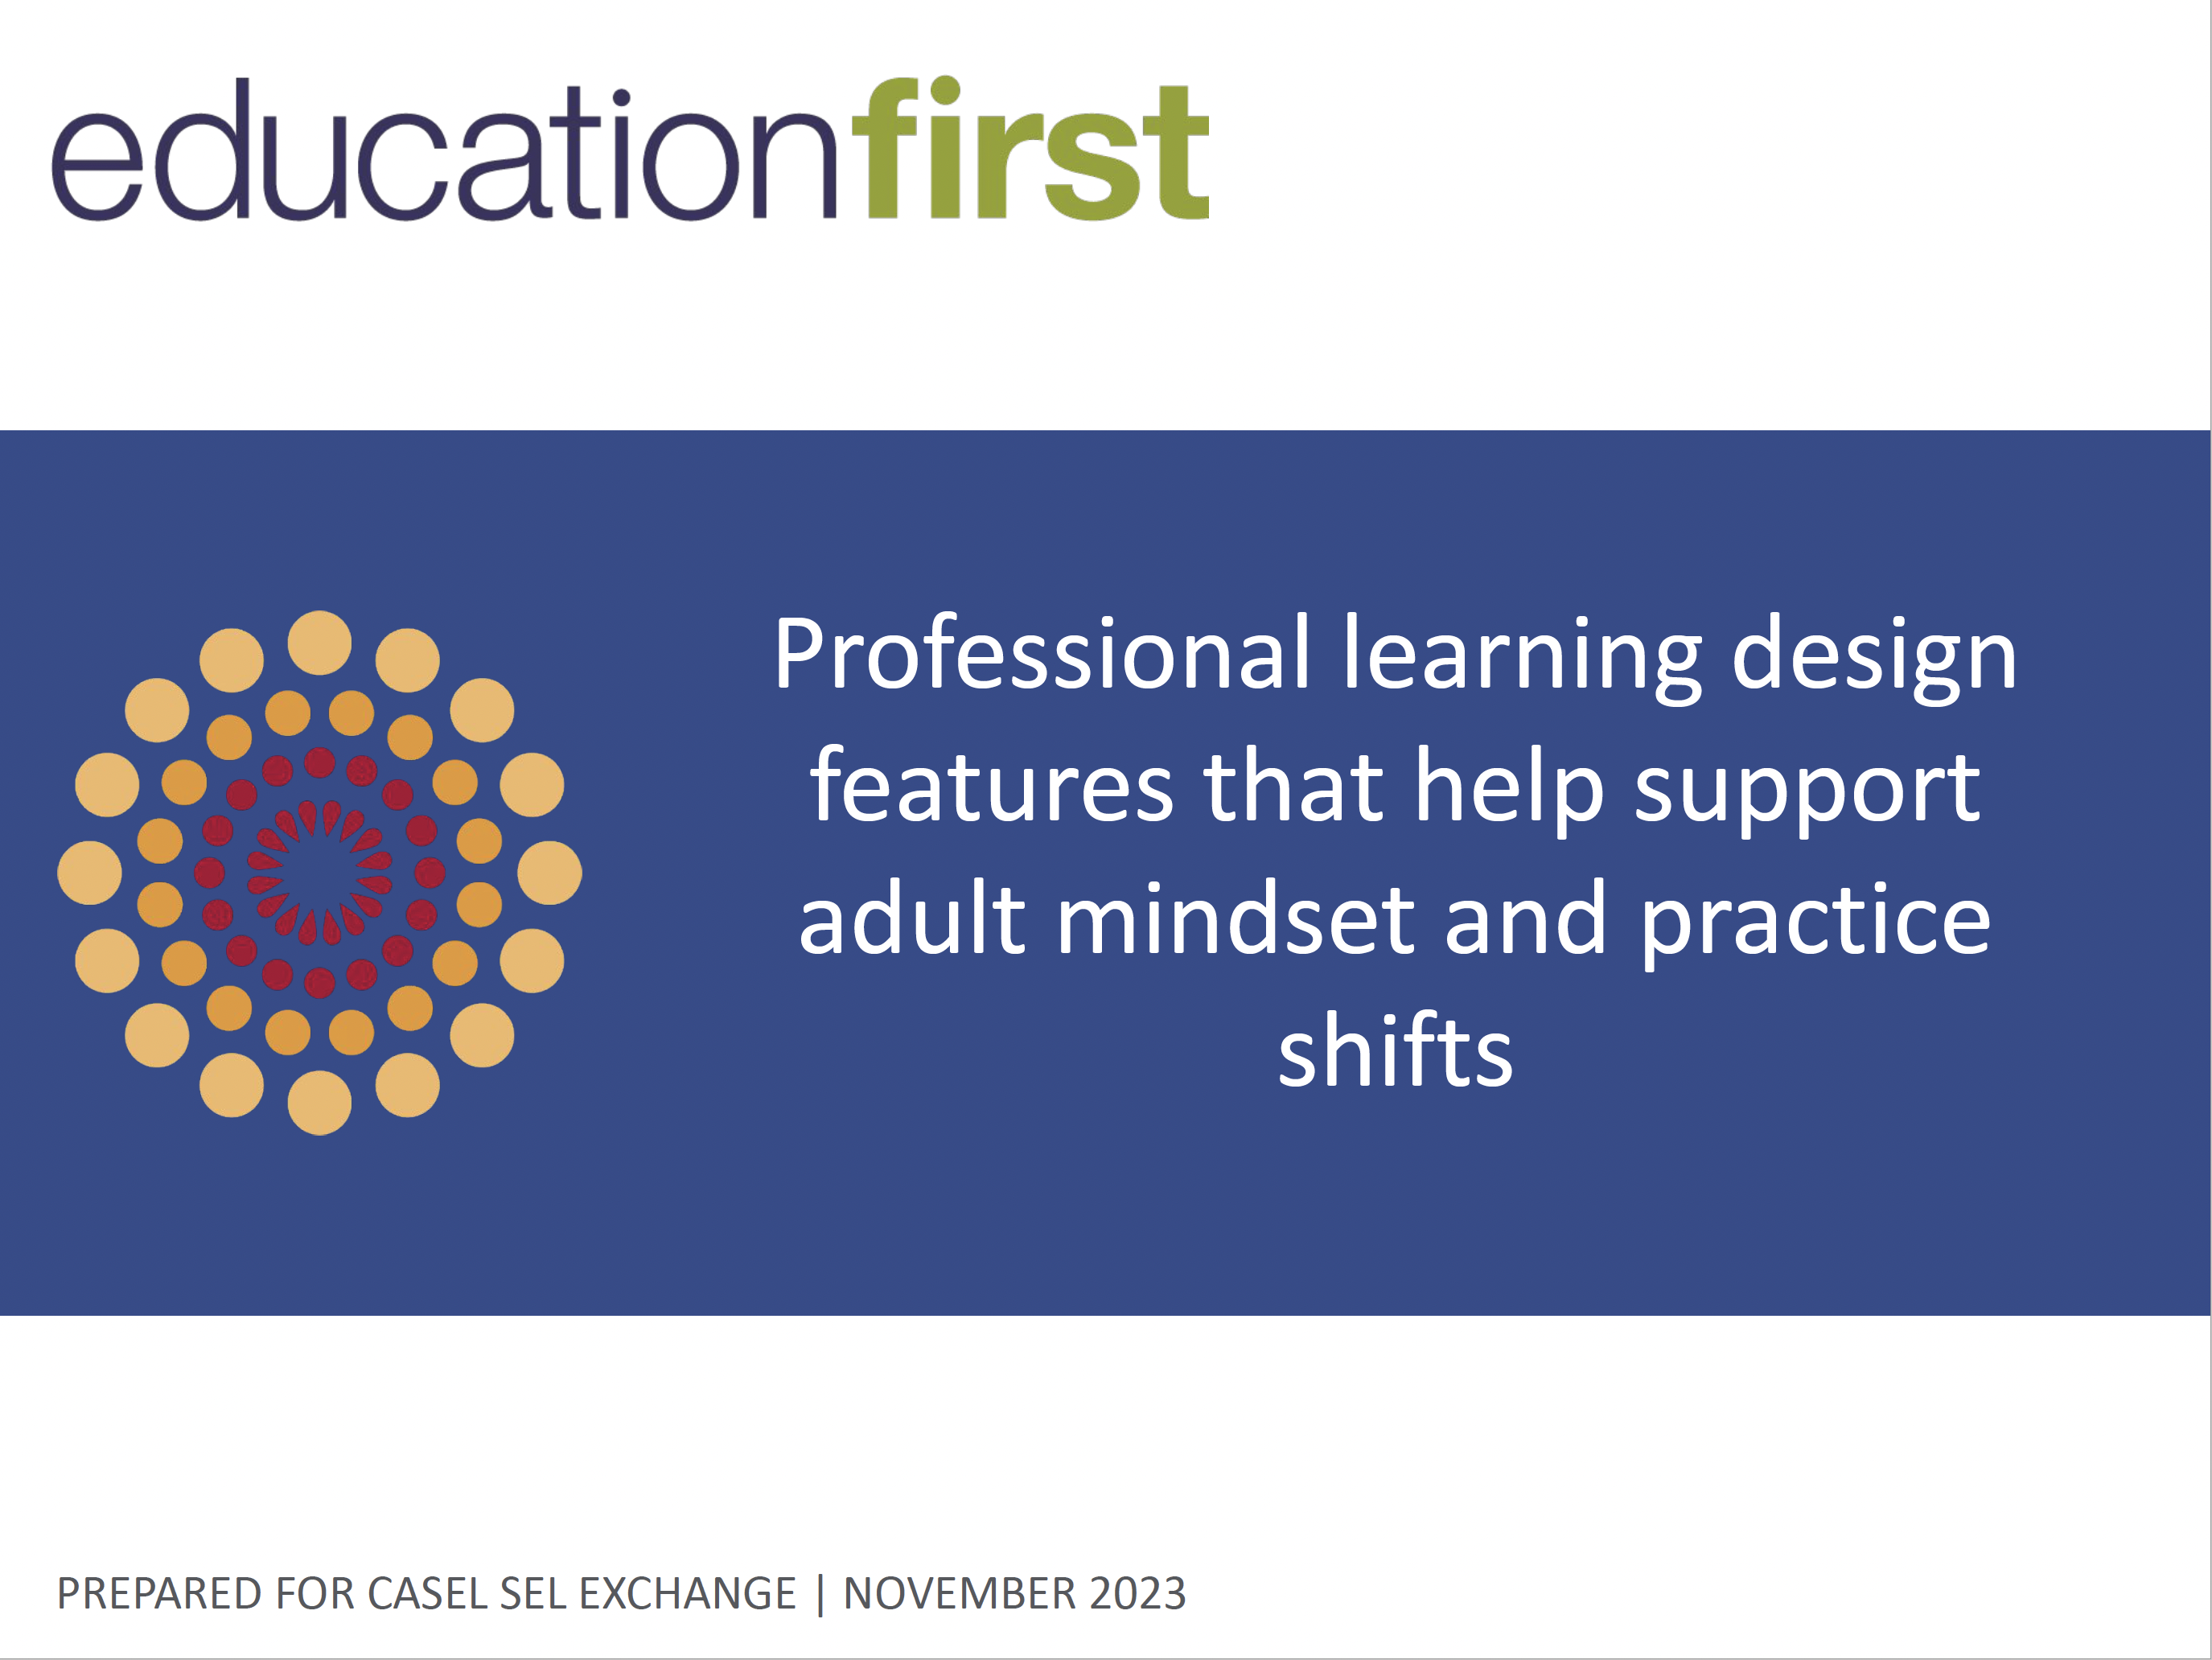 Professional Learning Design Features That Help Support Adult Mindset and Practice Shifts